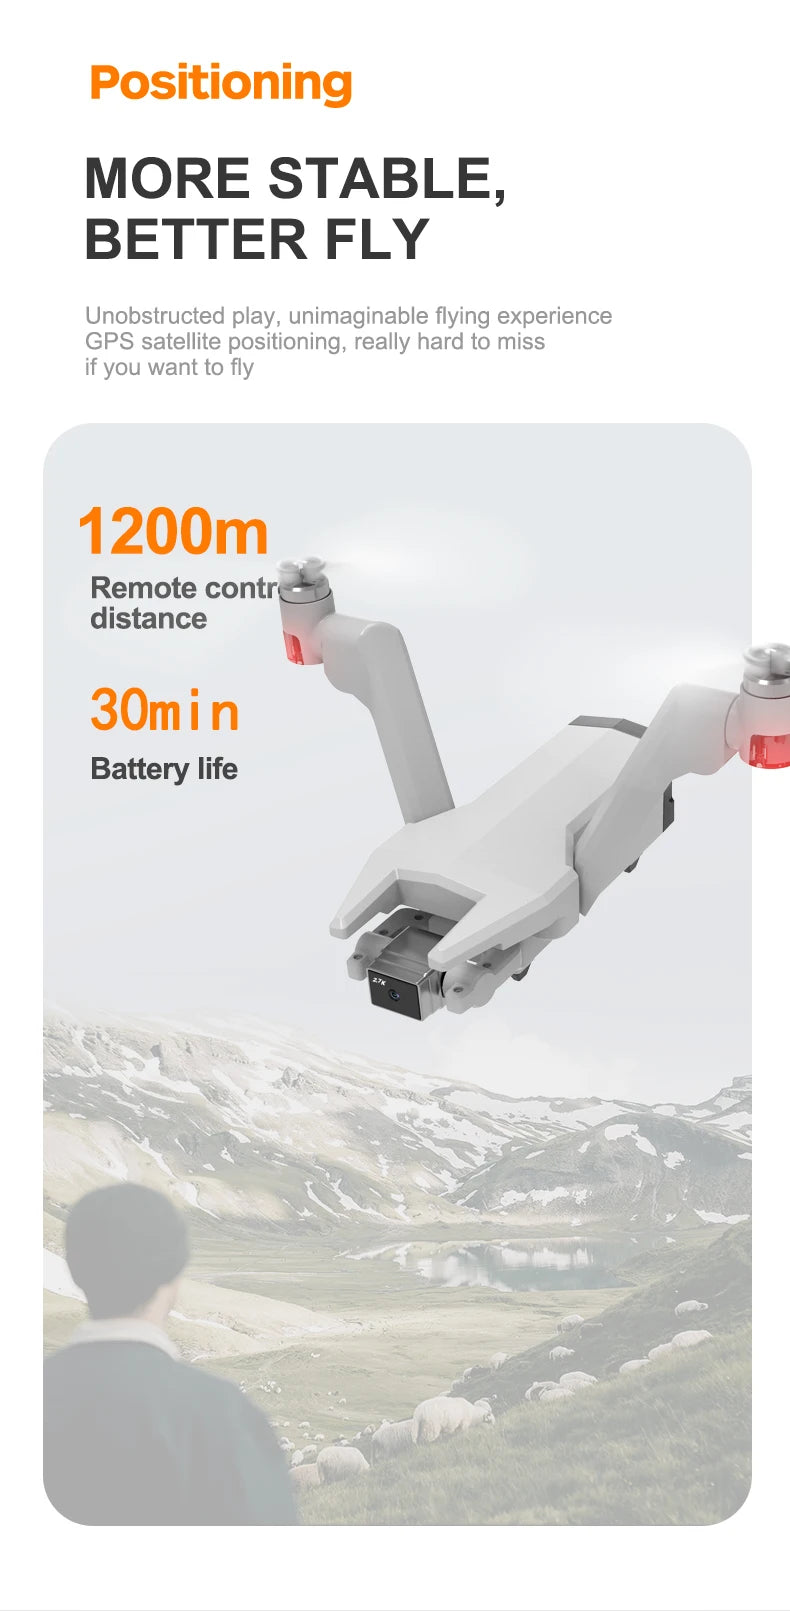 New L100 GPS V-type Drone, Positioning MORE STABLE; BETTER FLY Unobstructed play, unimagin